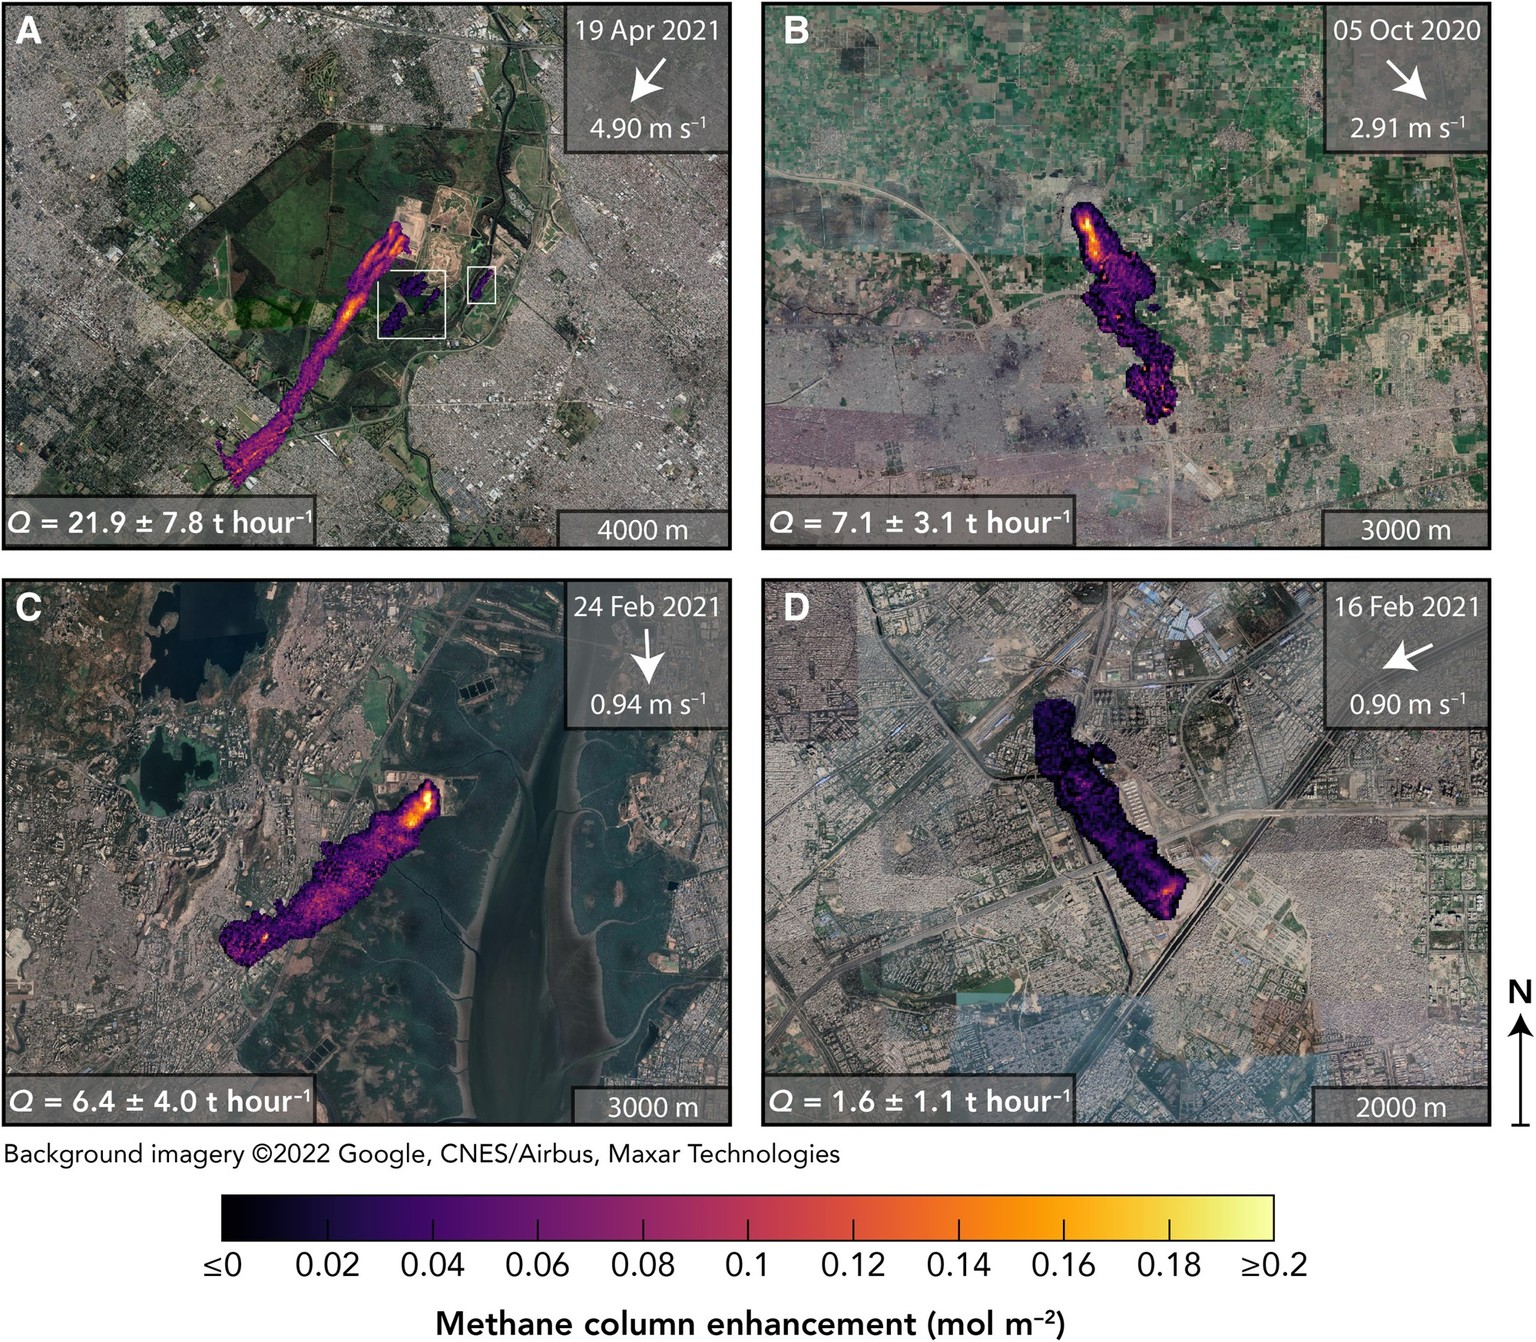 Left: methane concentrations measured by Tropomi during 2018-2019 around Buenos Aires, Argentina. Right: zoom-in by GHGSat on April 19th 2021, showing methane plumes from the landfill in the city cent ...